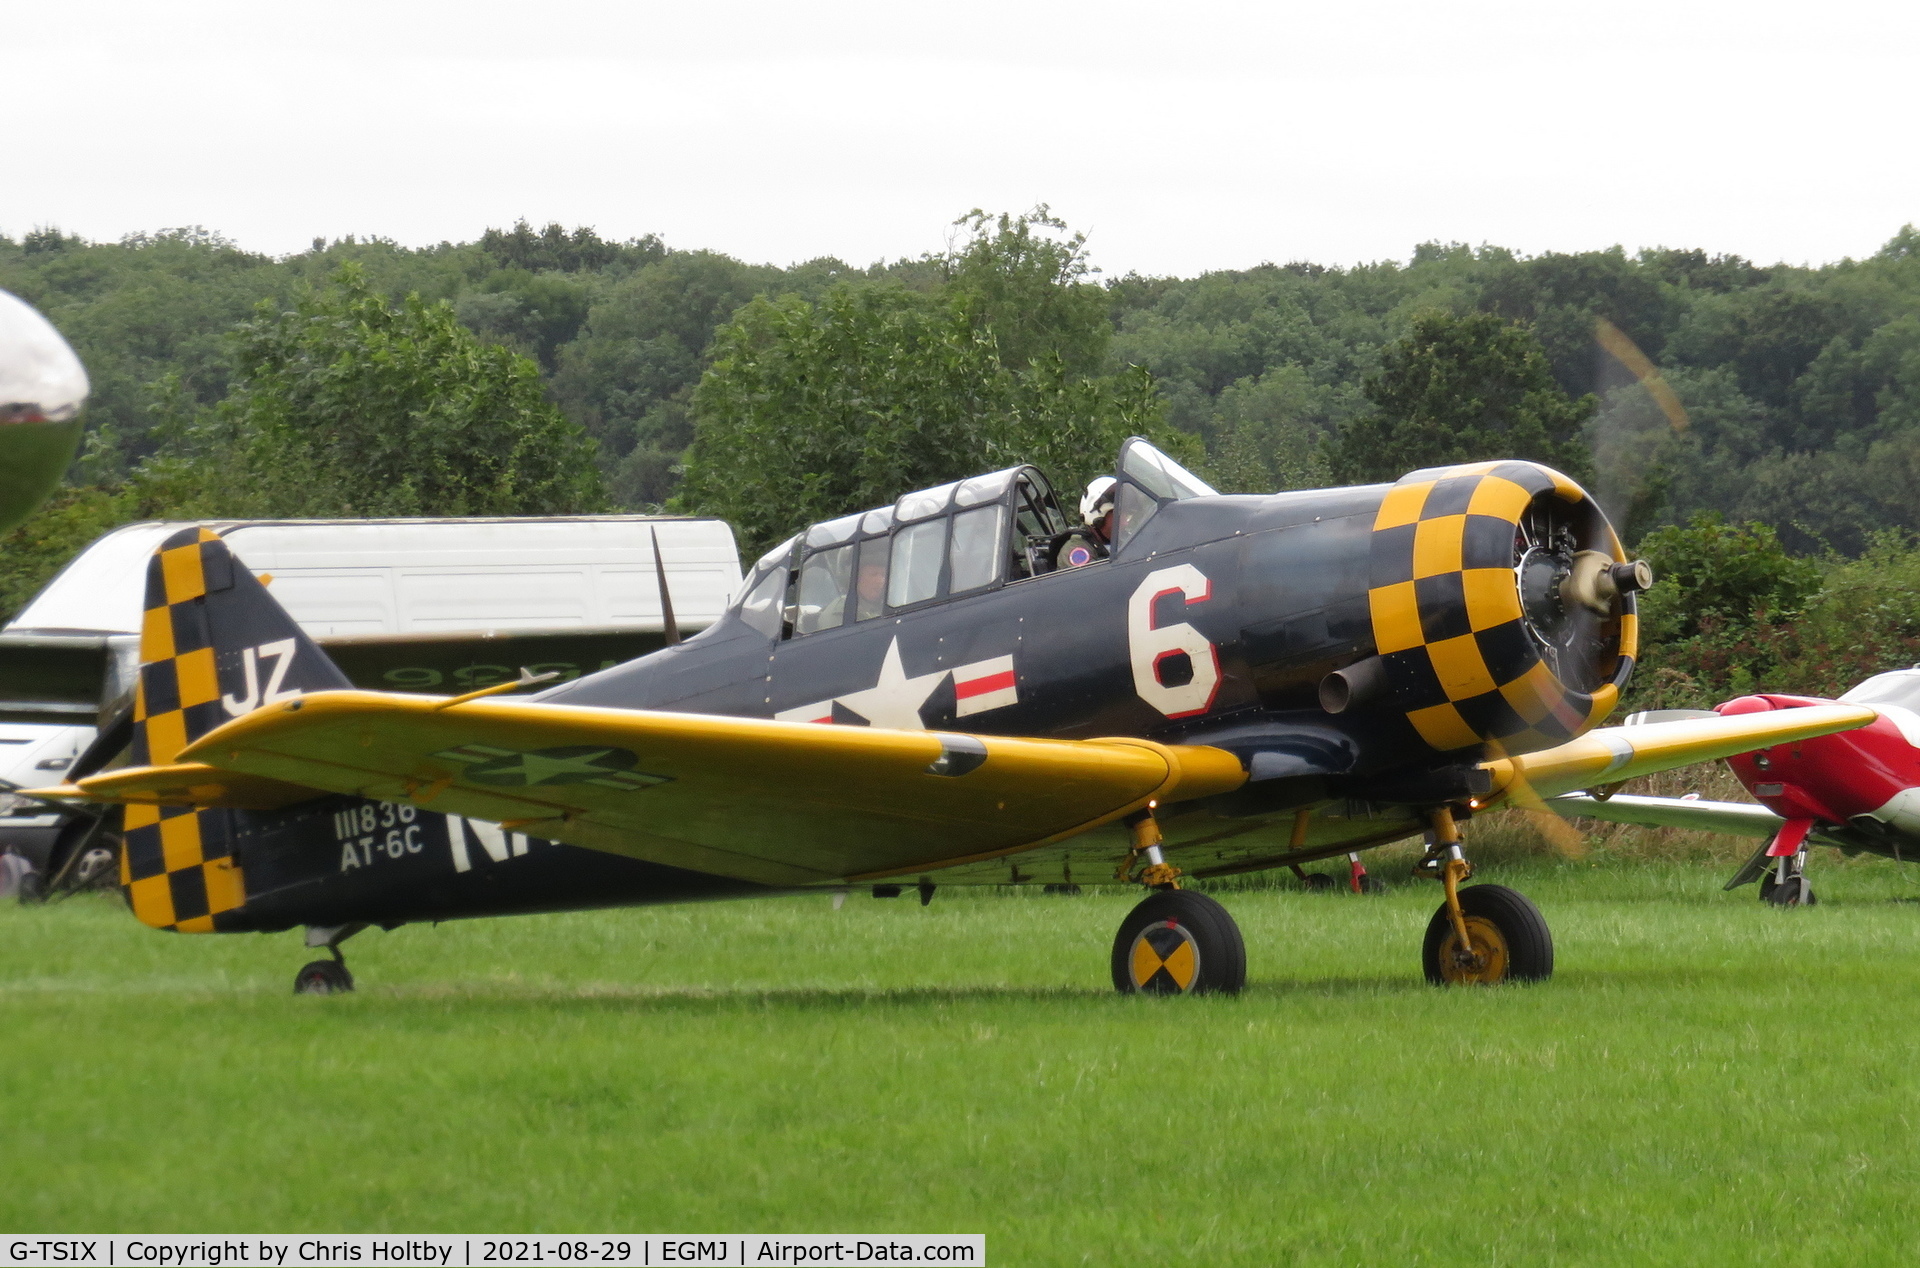 G-TSIX, 1948 North American AT-6C Harvard IIA C/N 88-9725, Taxxiing for take-off at the Little Gransden Airshow 2021